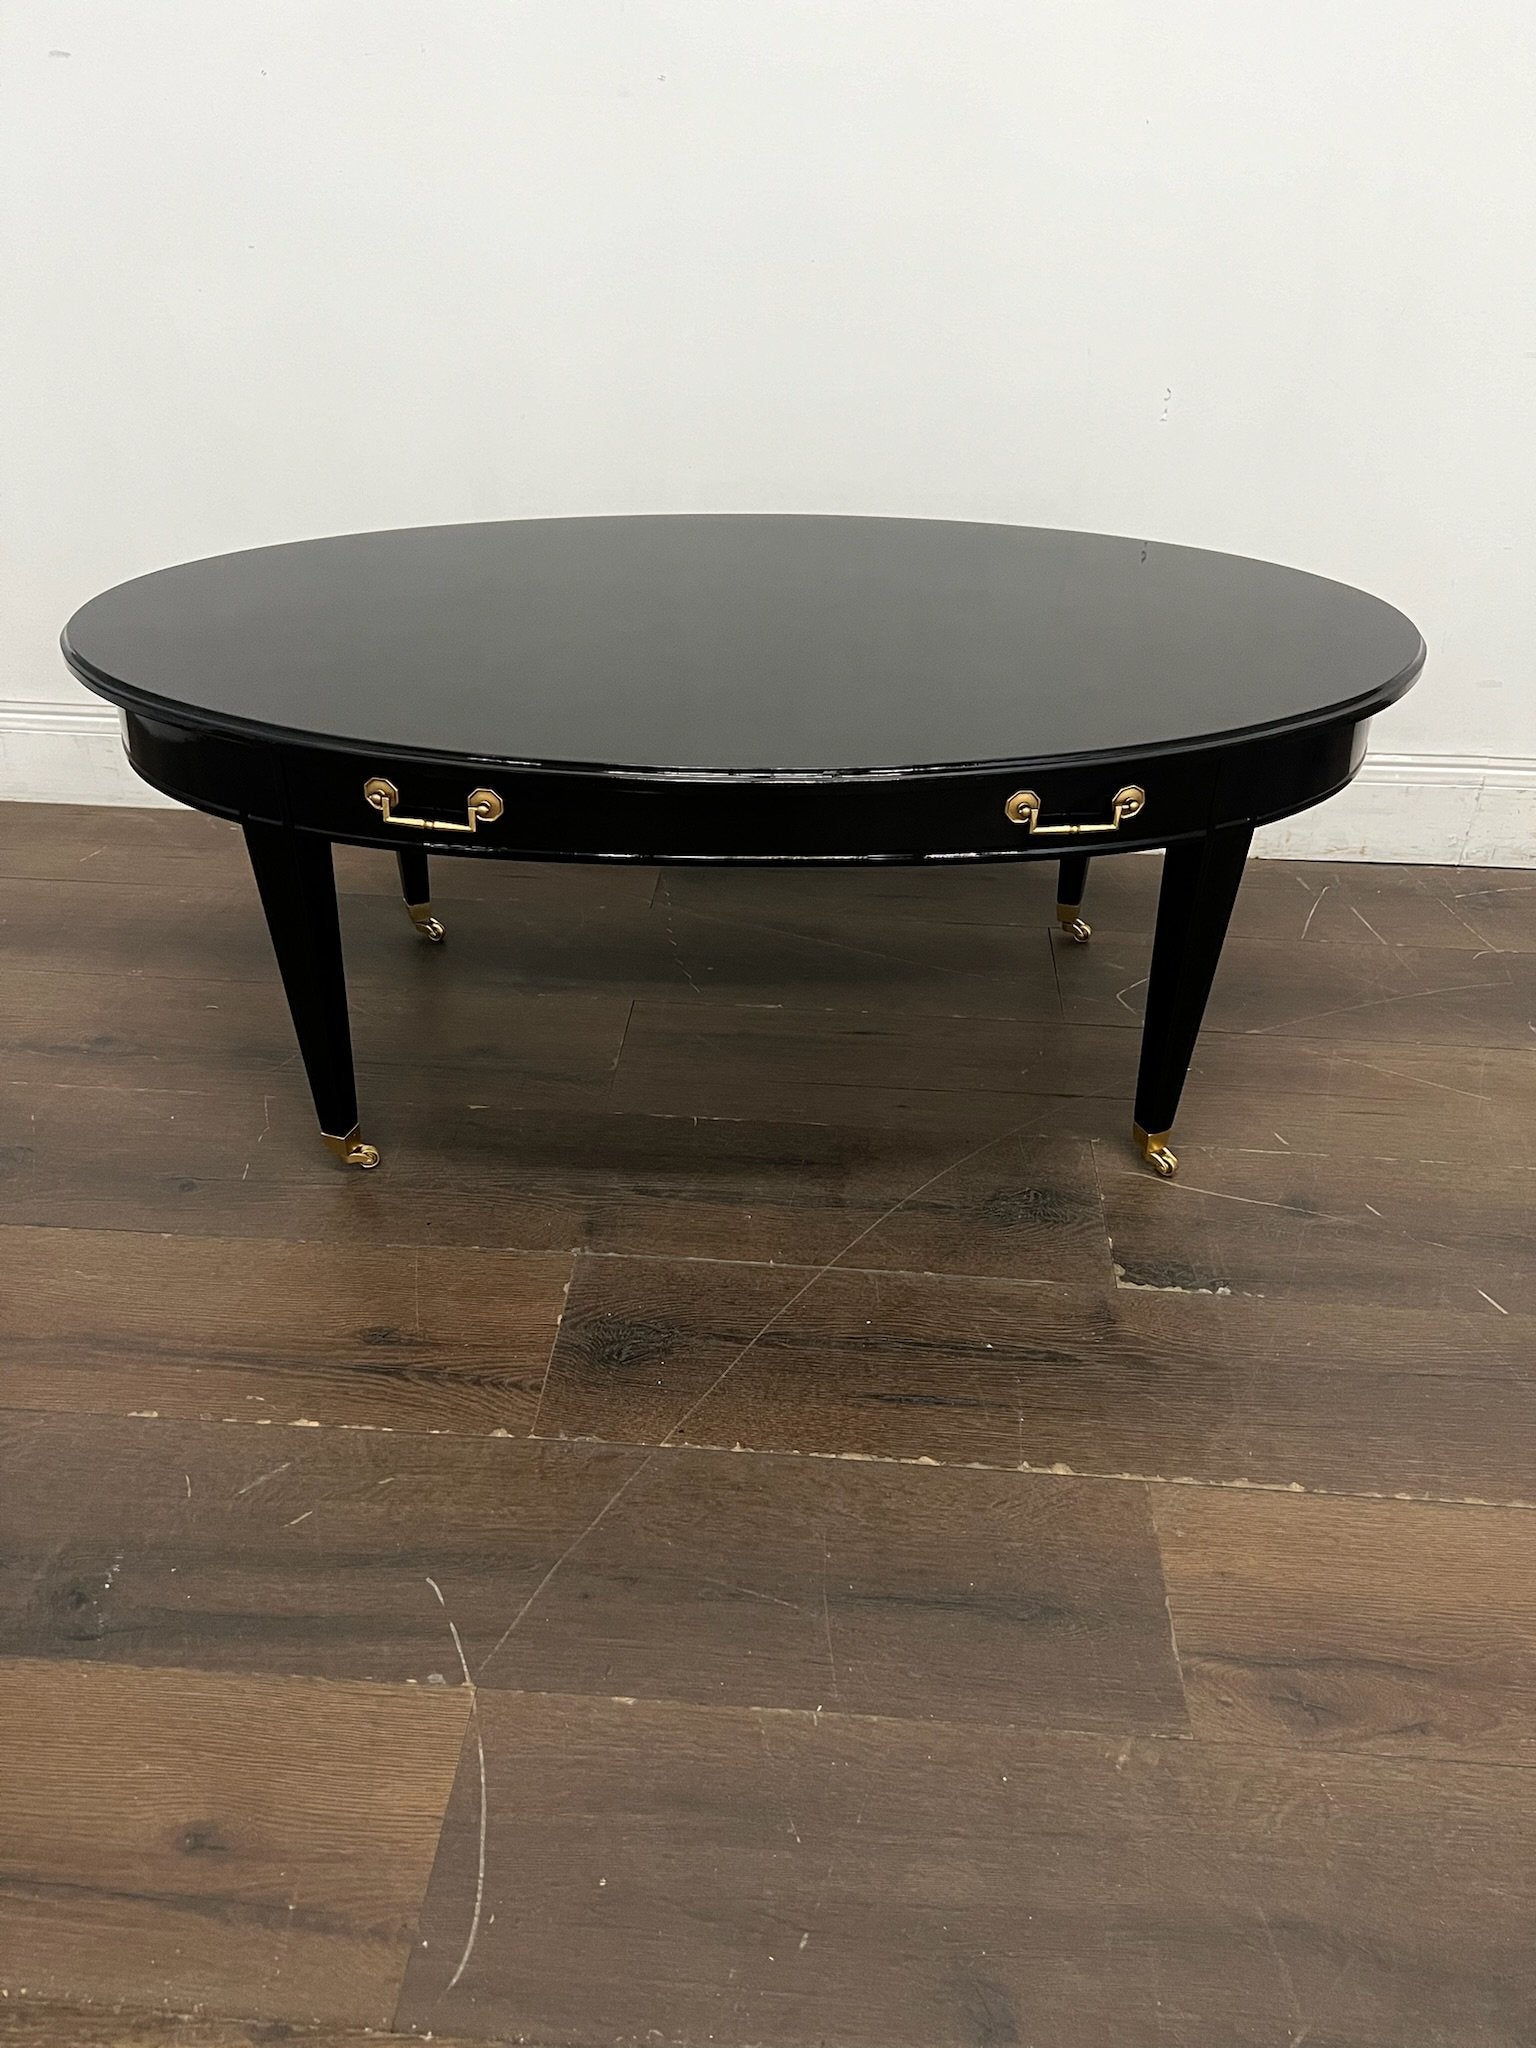 AVAILABLE: Black Benjamin Moore Coffee Table